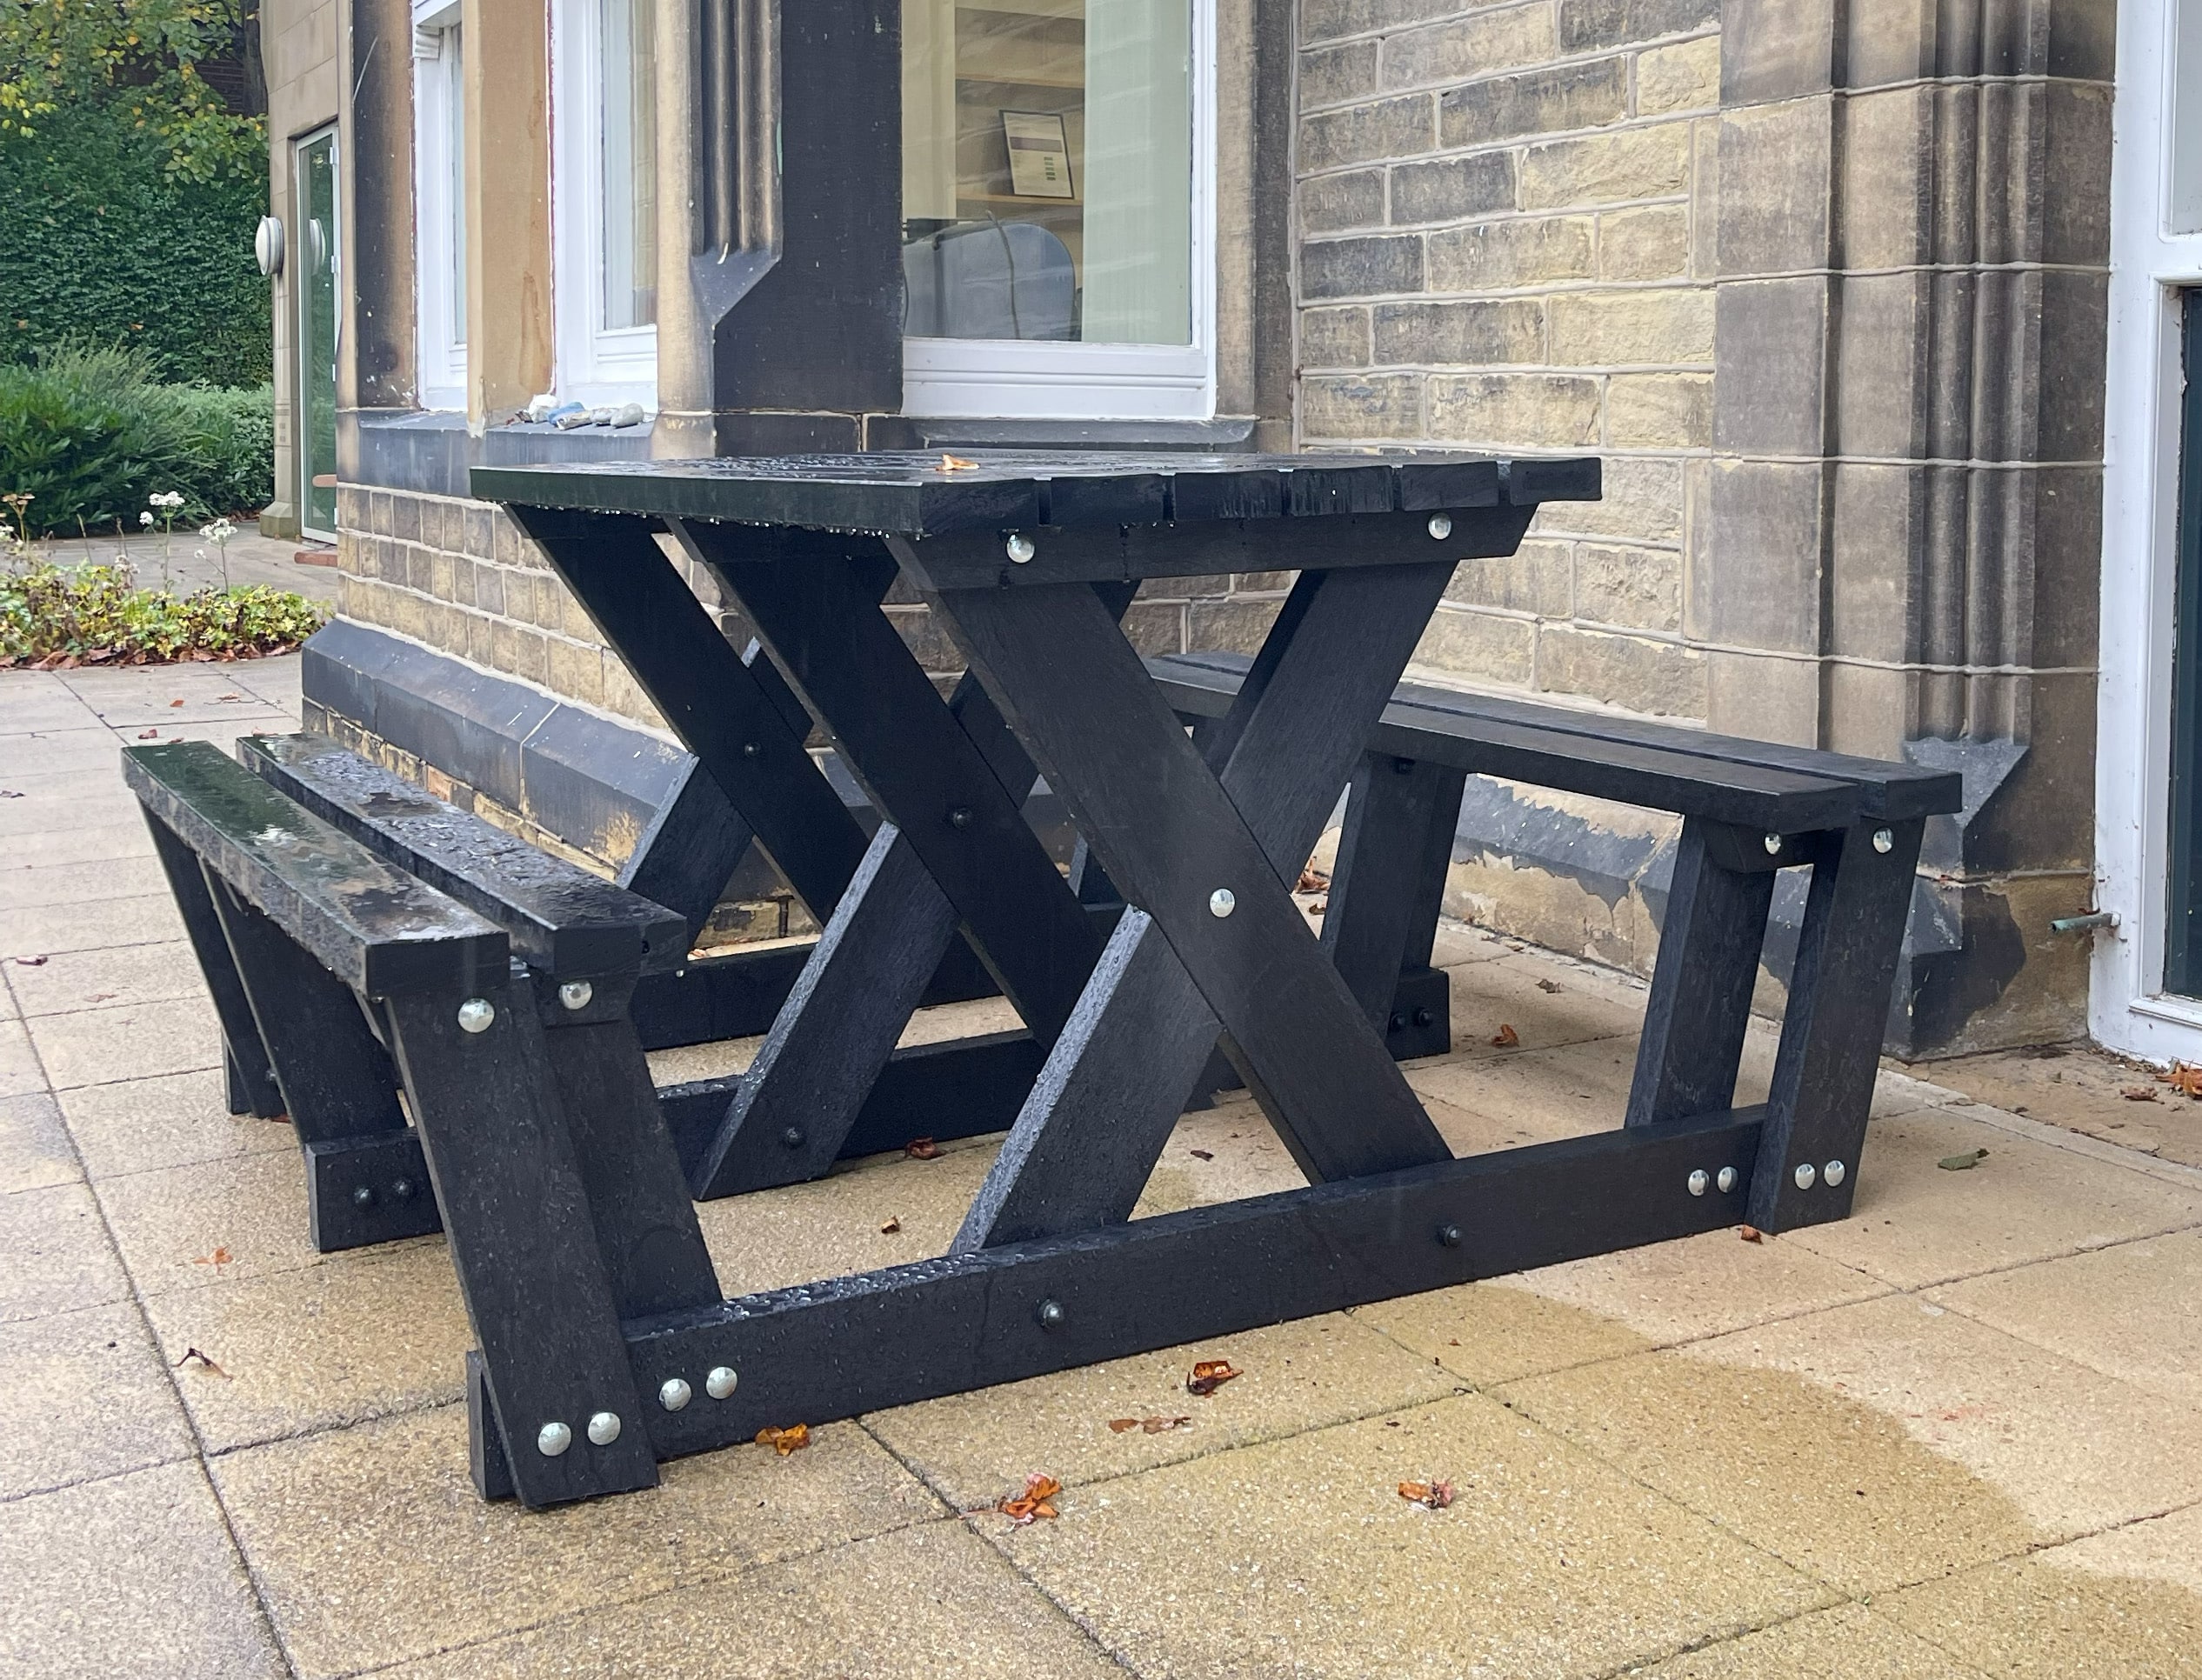 The Batley "walkthrough" recycled plastic picnic table is key part of our accessibility range of furniture as less mobile users can get to the seats without having to lift their legs very much. This table is at the Overgate Hospice in Elland, West Yorkshire.